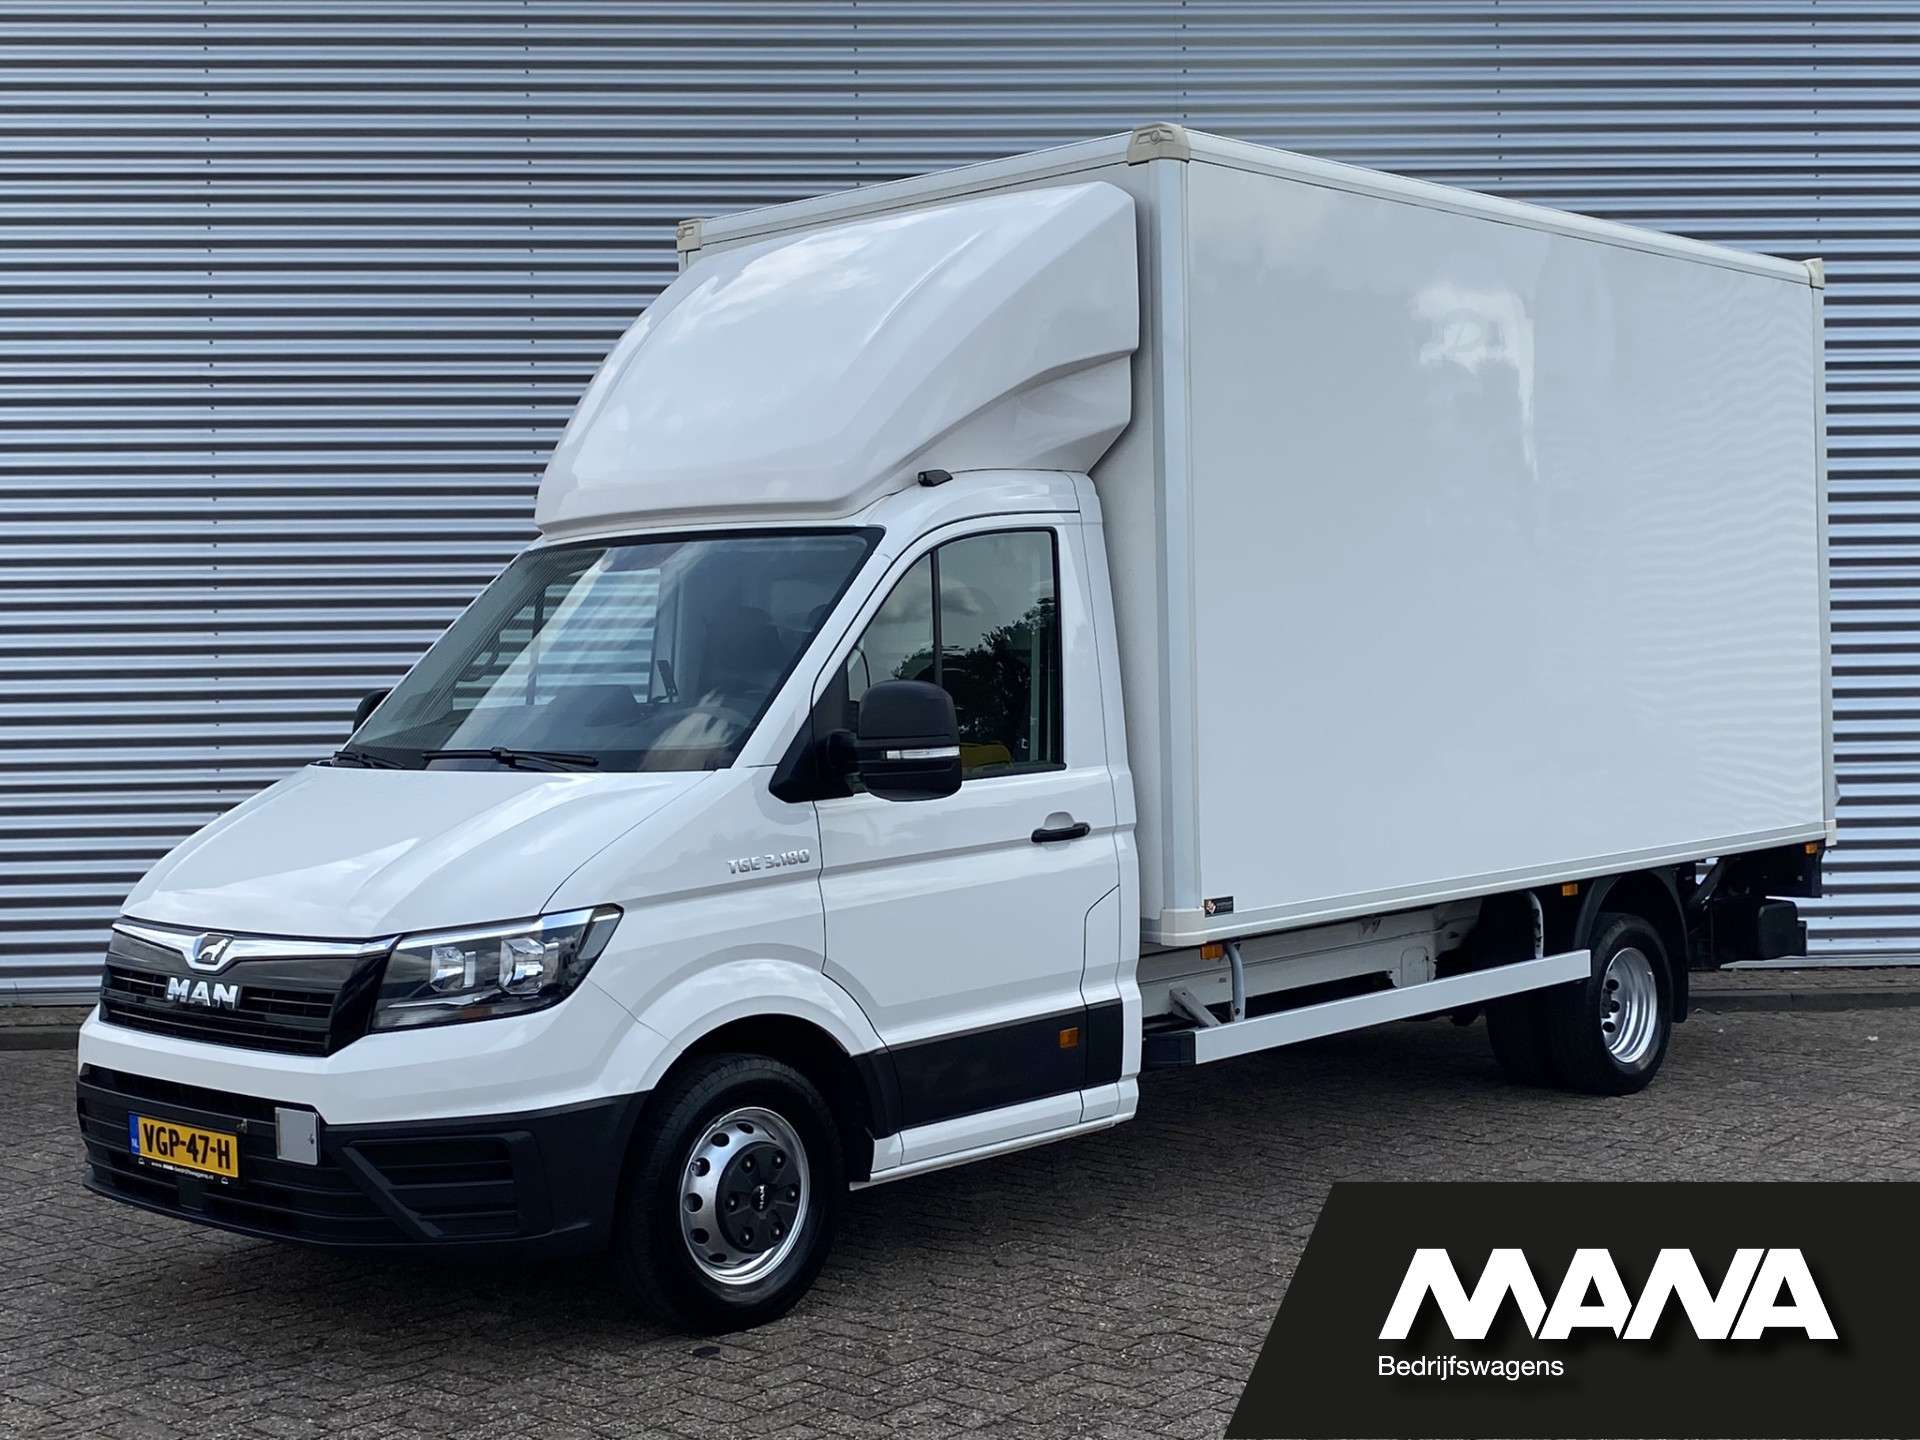 MAN TGE Transporter in White used in ROOSENDAAL for € 30,129.-